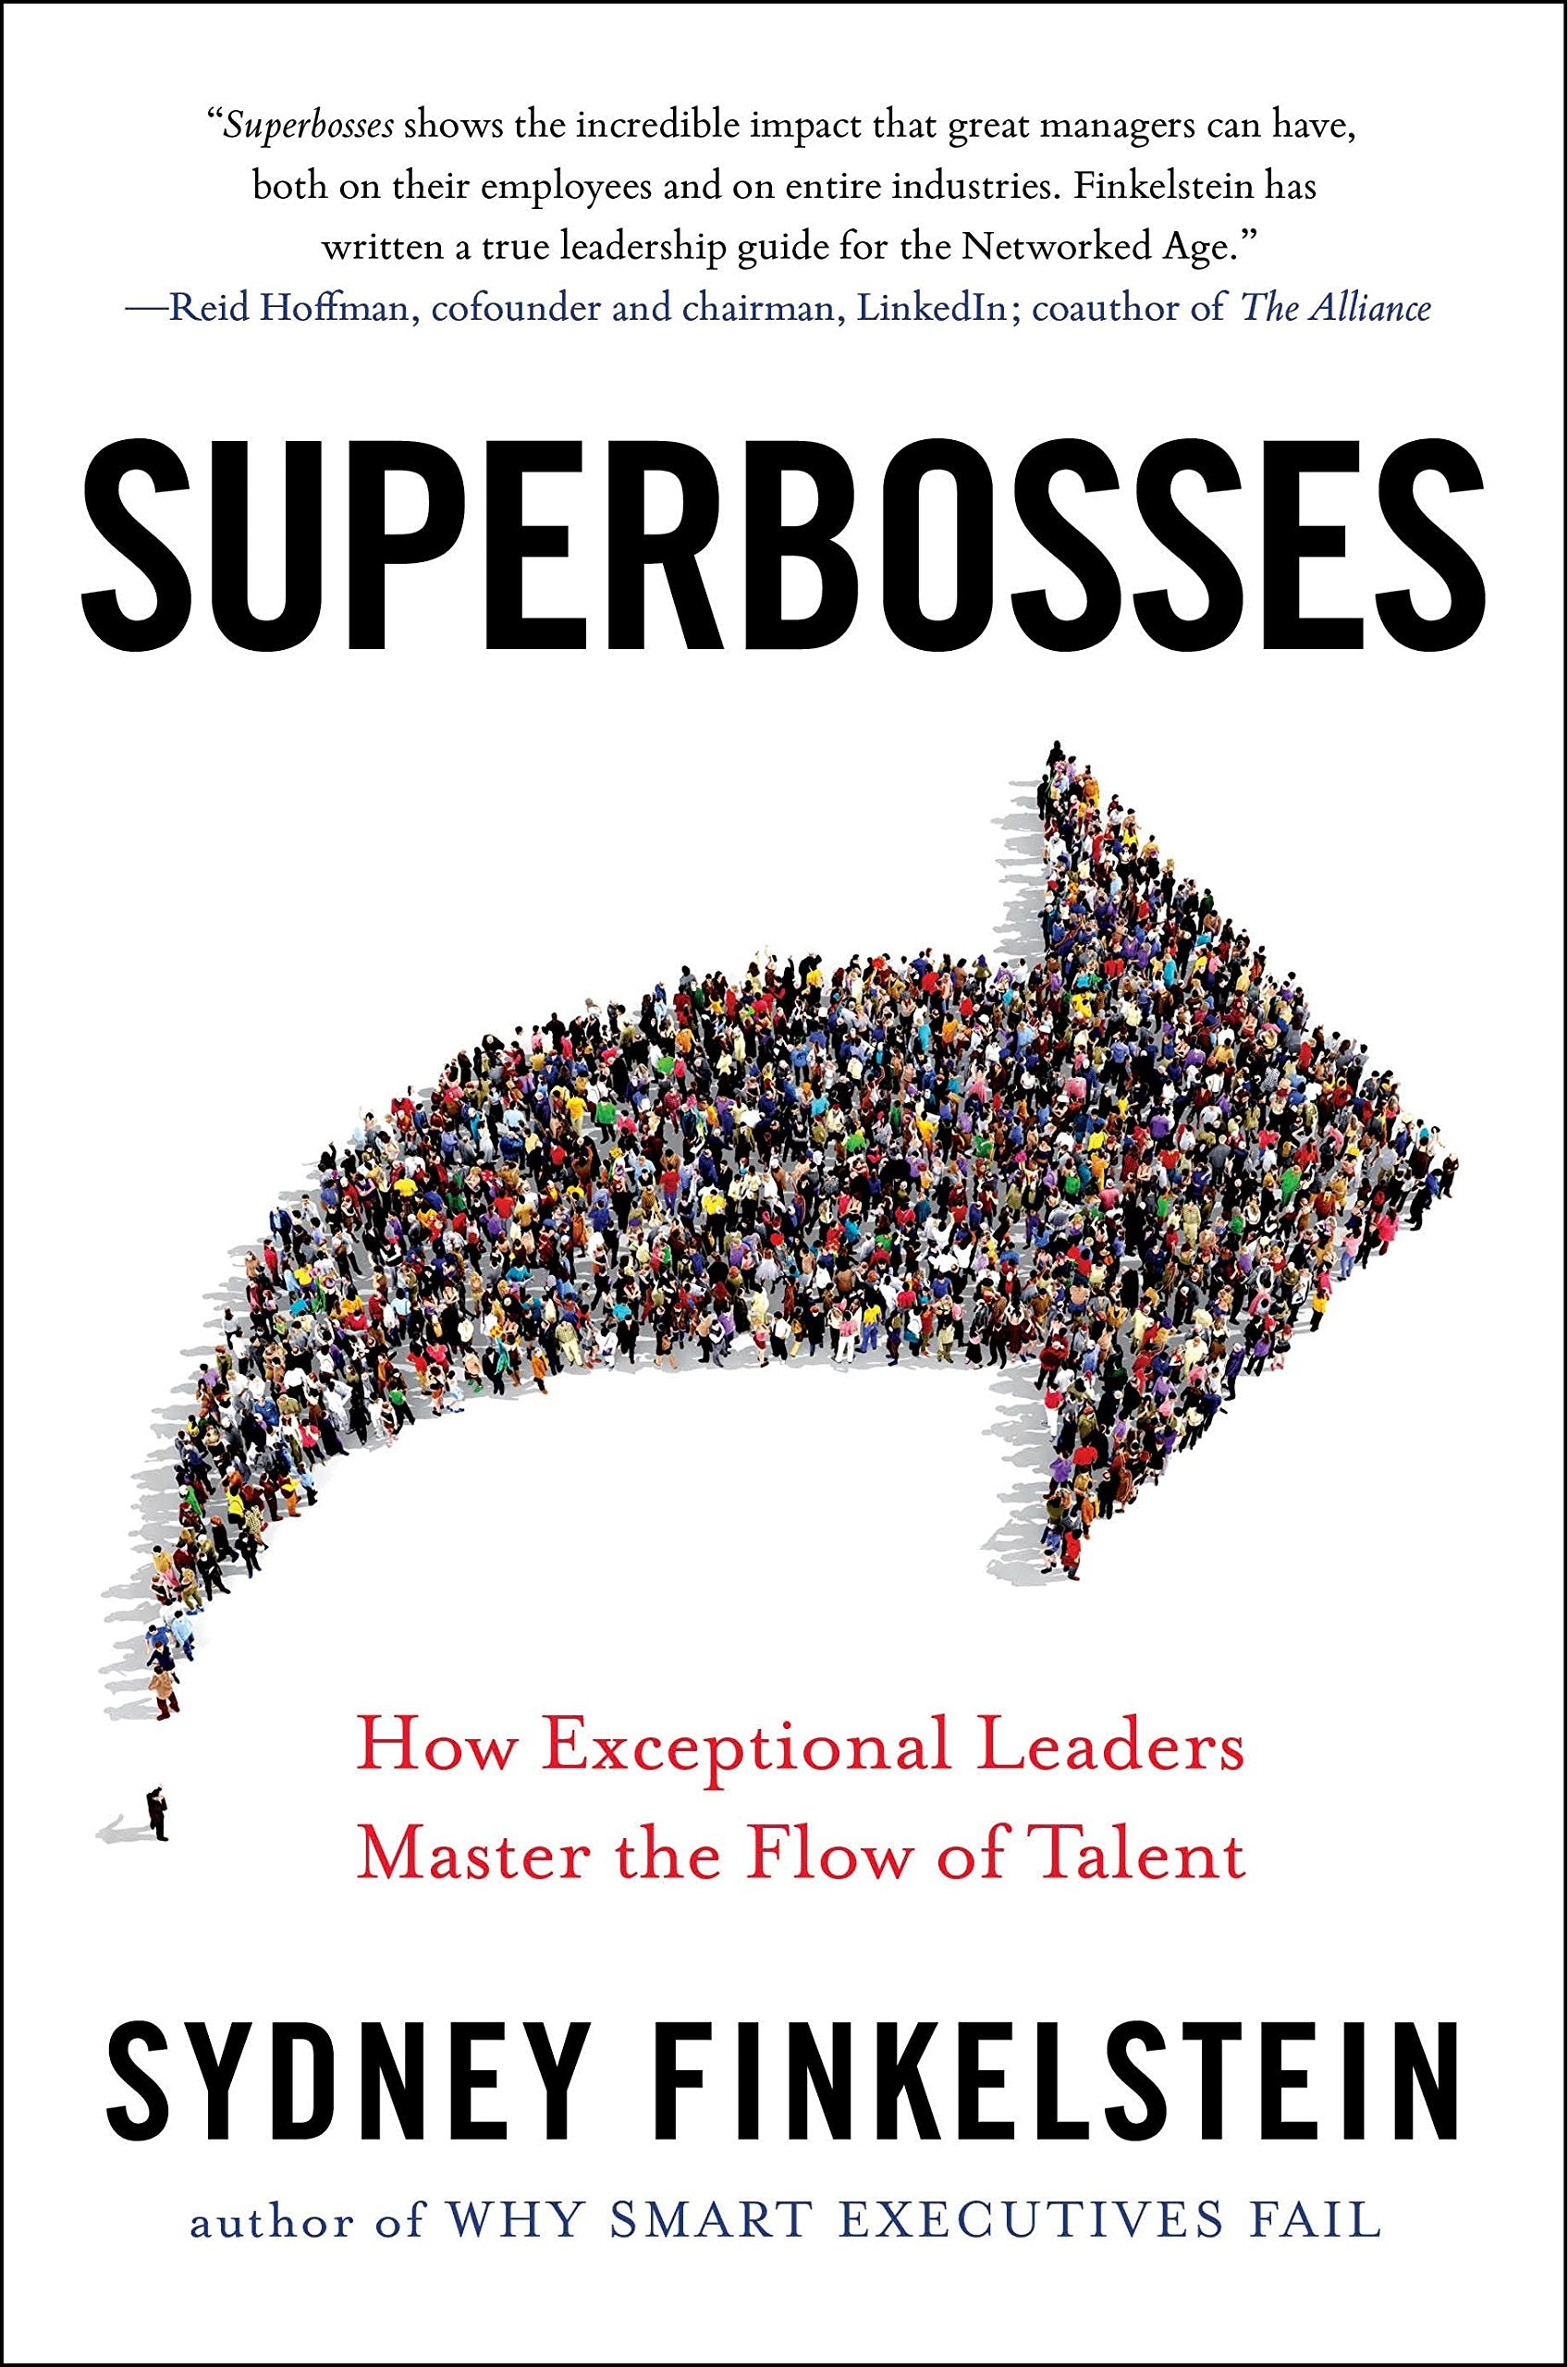 *Superbosses: How Exceptional Leaders Master the Flow of Talent